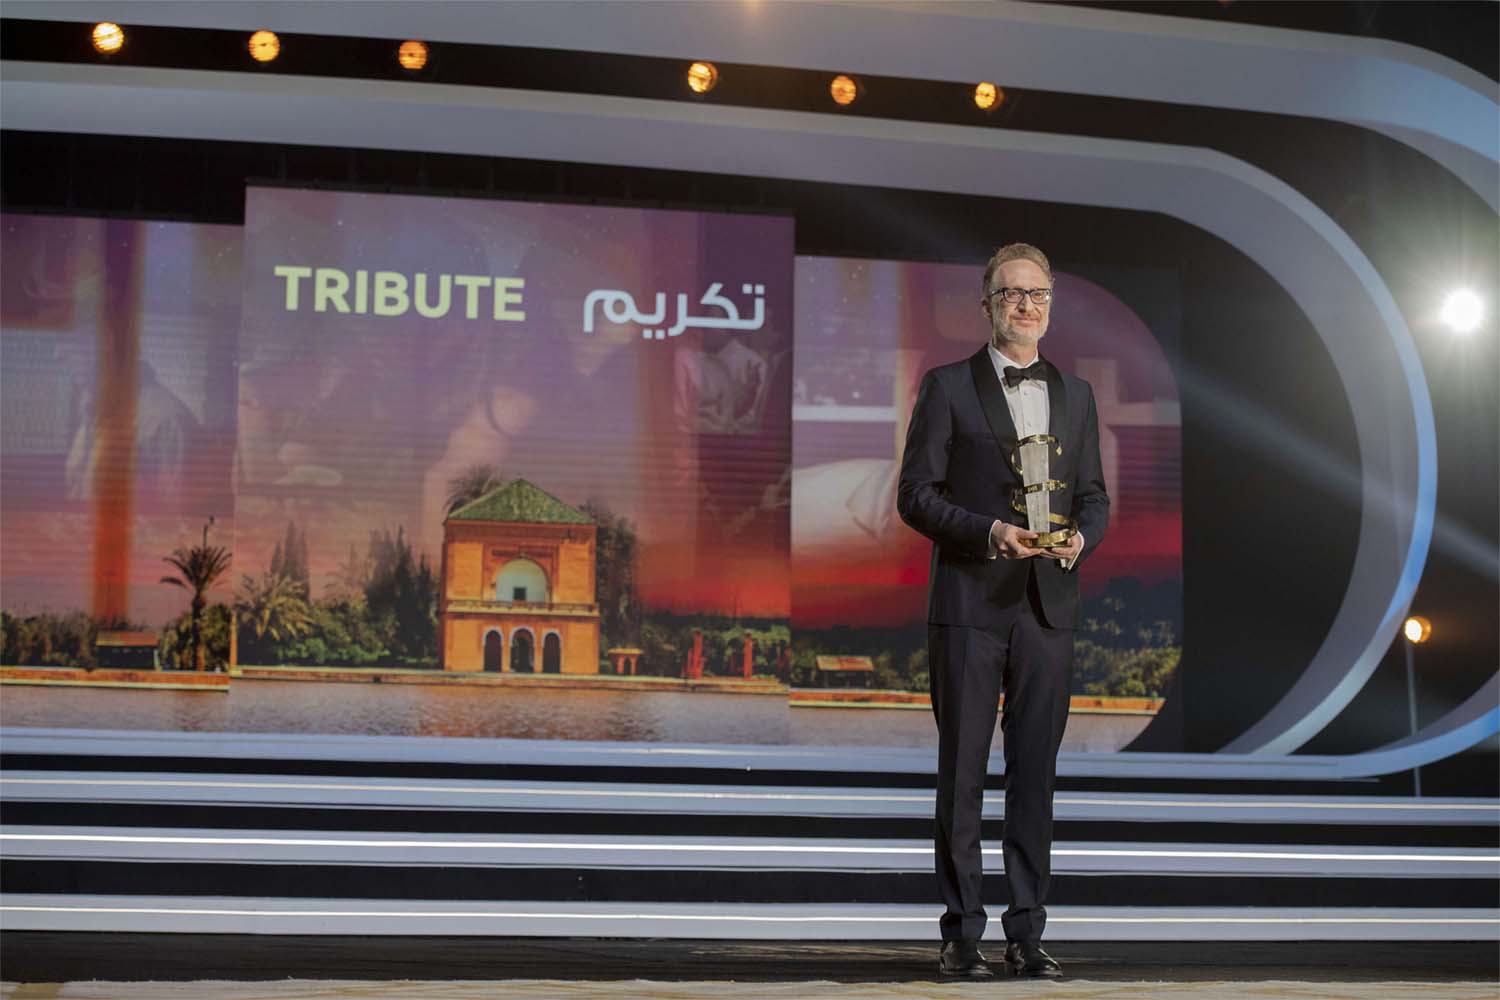 Gray was president of the Jury of the 17th edition of the Marrakech International Film Festival